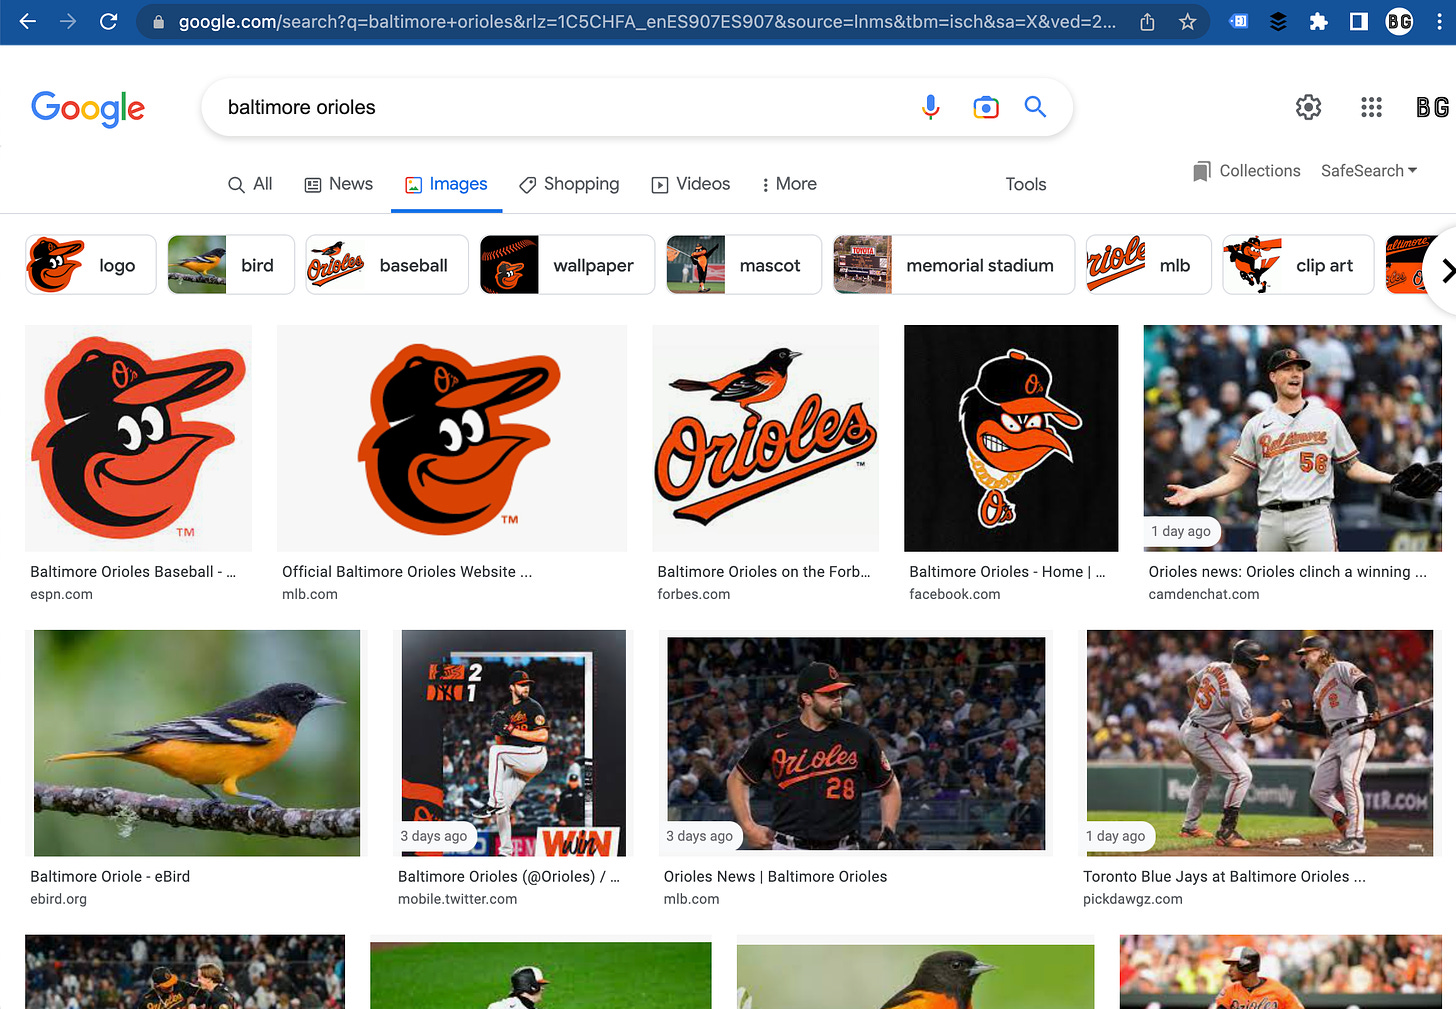 "Baltimore Orioles" Google image search results